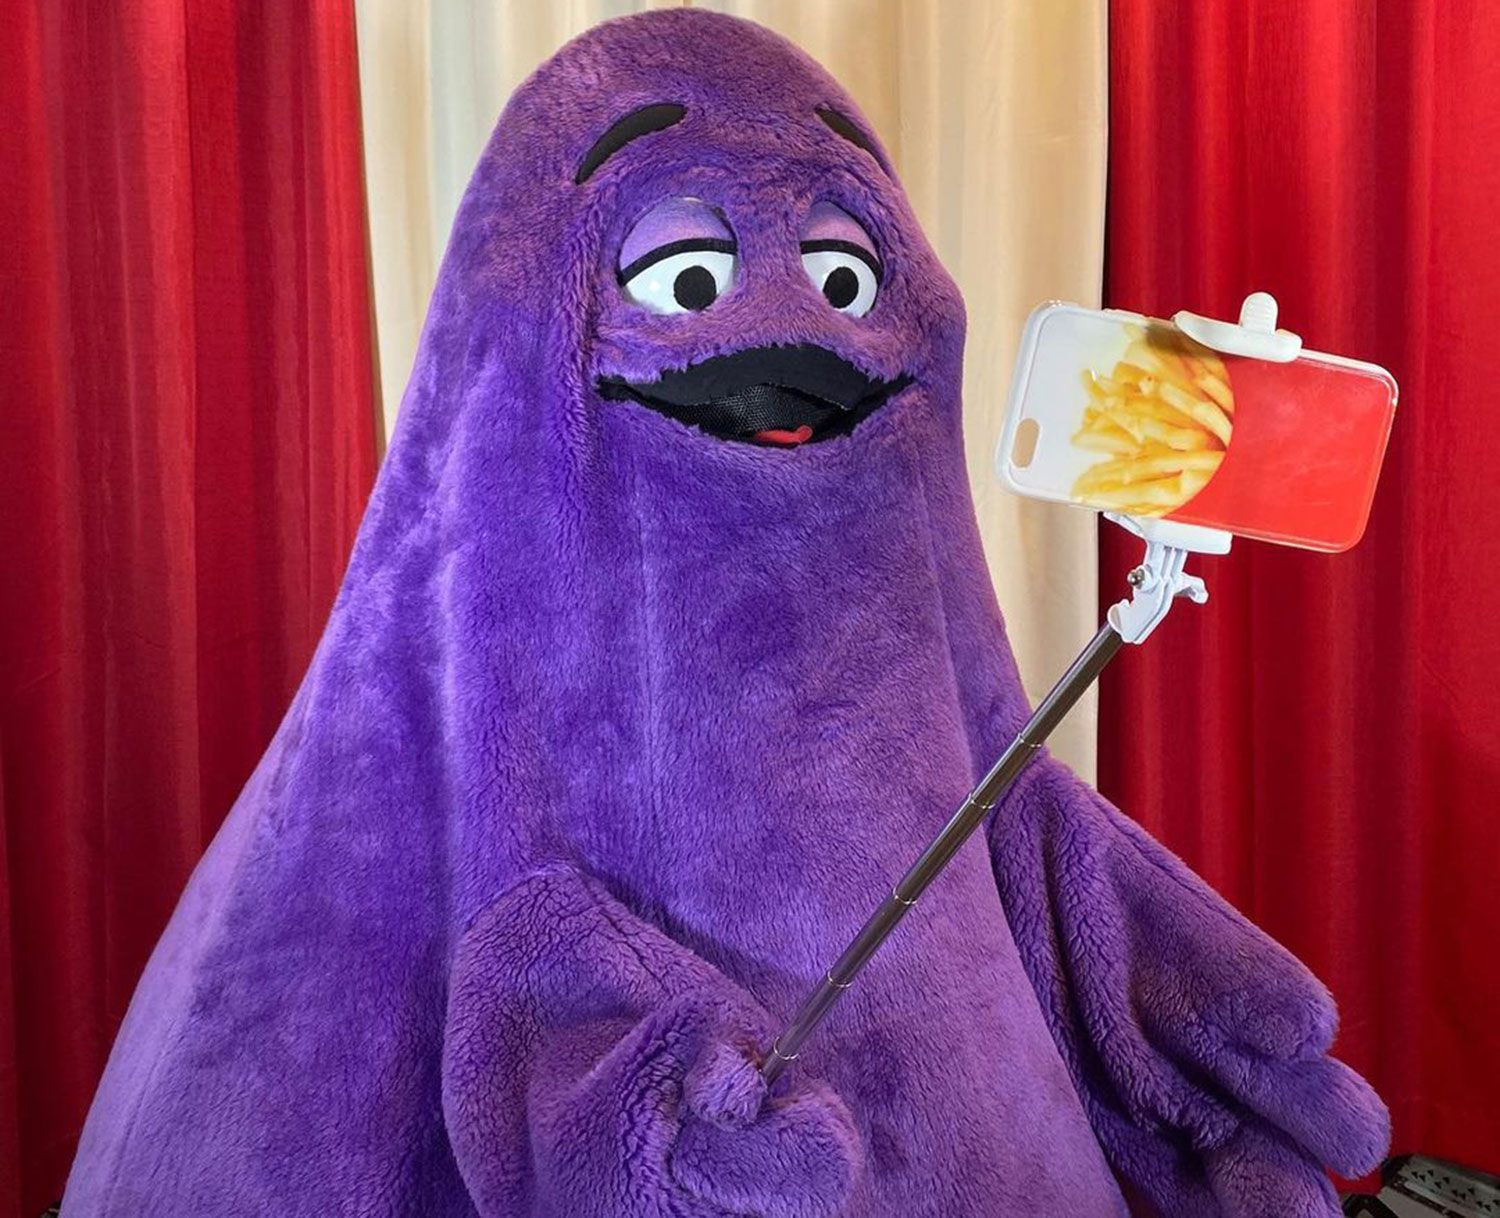 What Is Grimace? McDonald's Manager Clarifies Character's